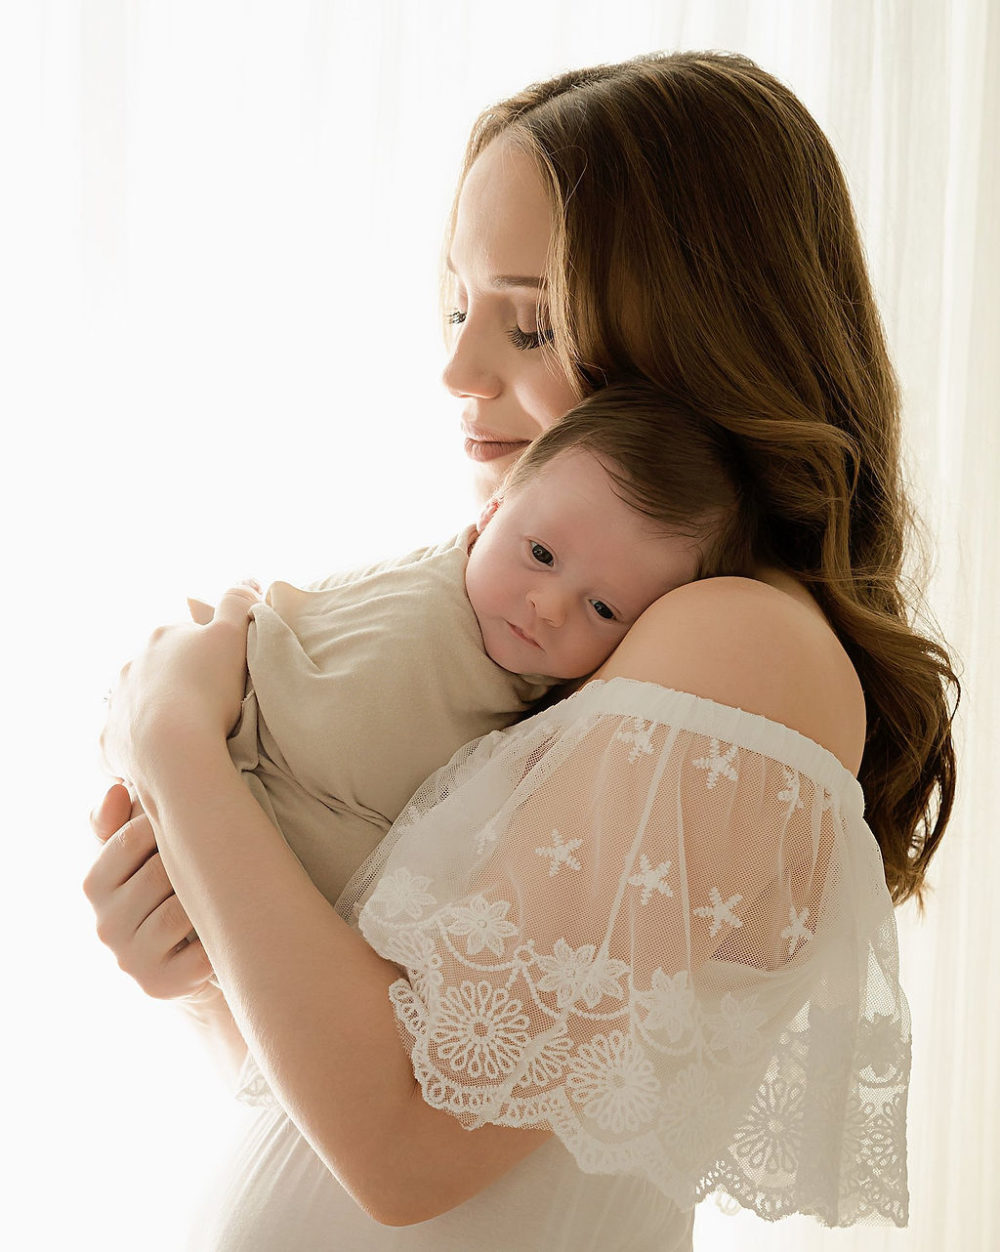 New mom wearing dress holding baby in wrap for his light and simple newborn session in Voorhees, New Jersey.